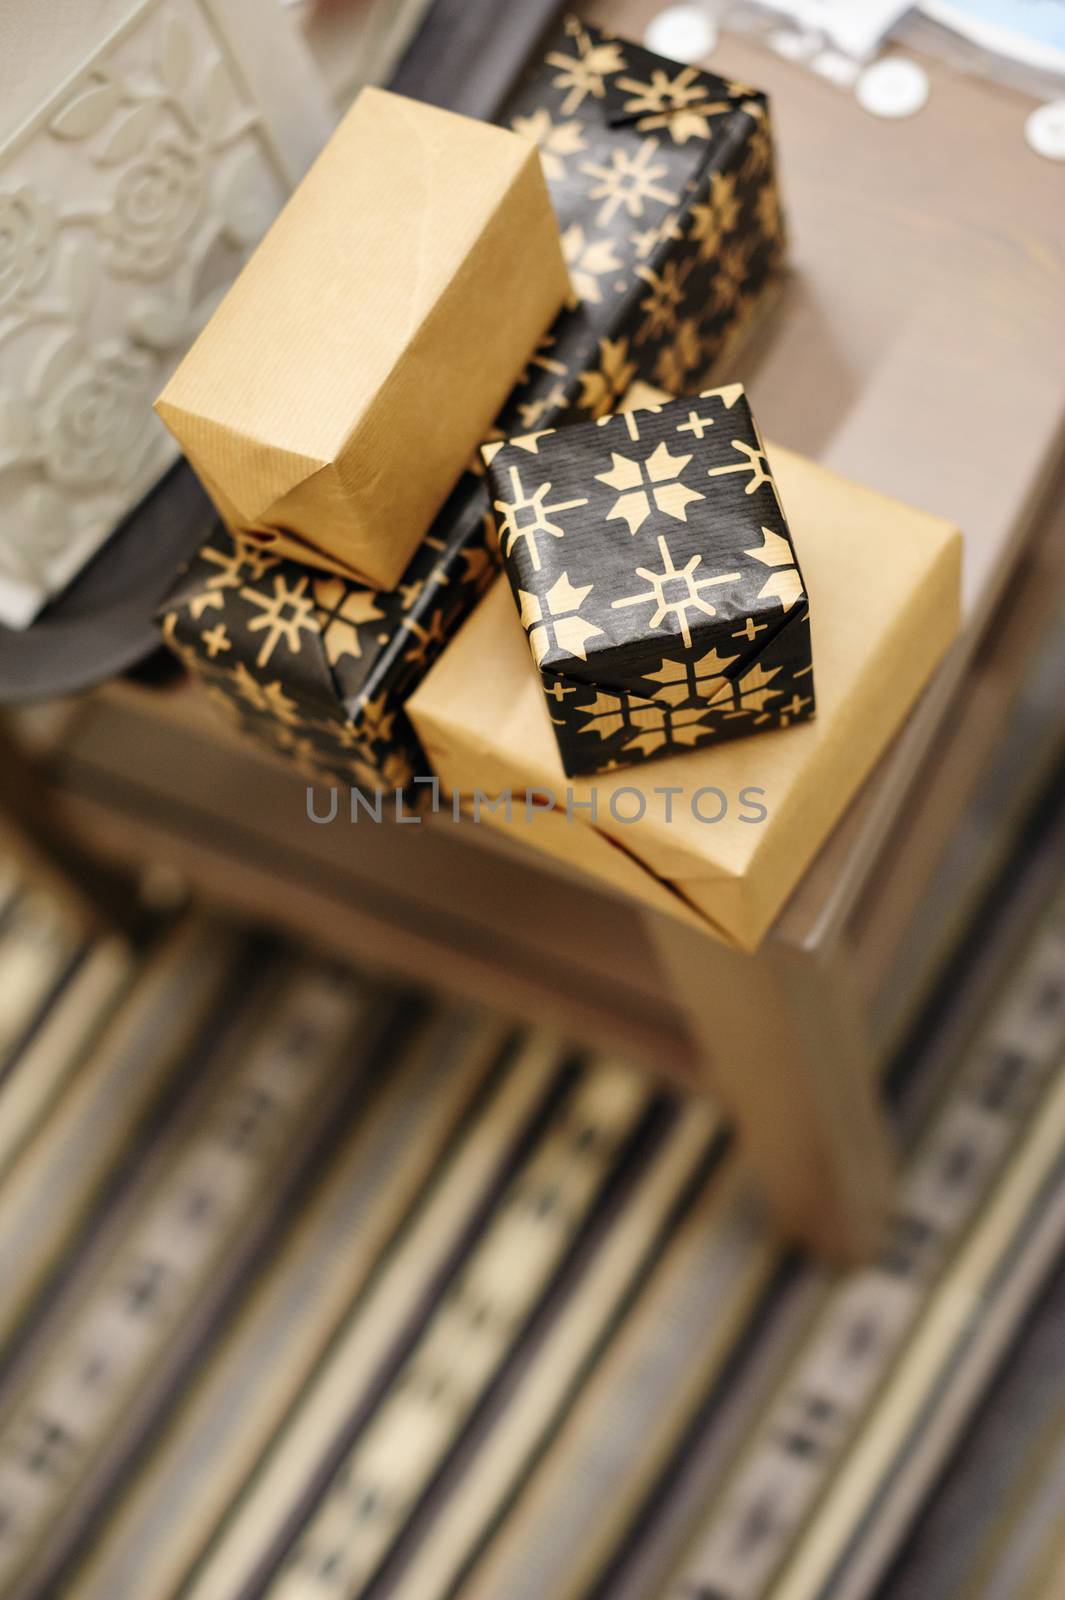 beautiful little gift boxes for Christmas holiday by timonko